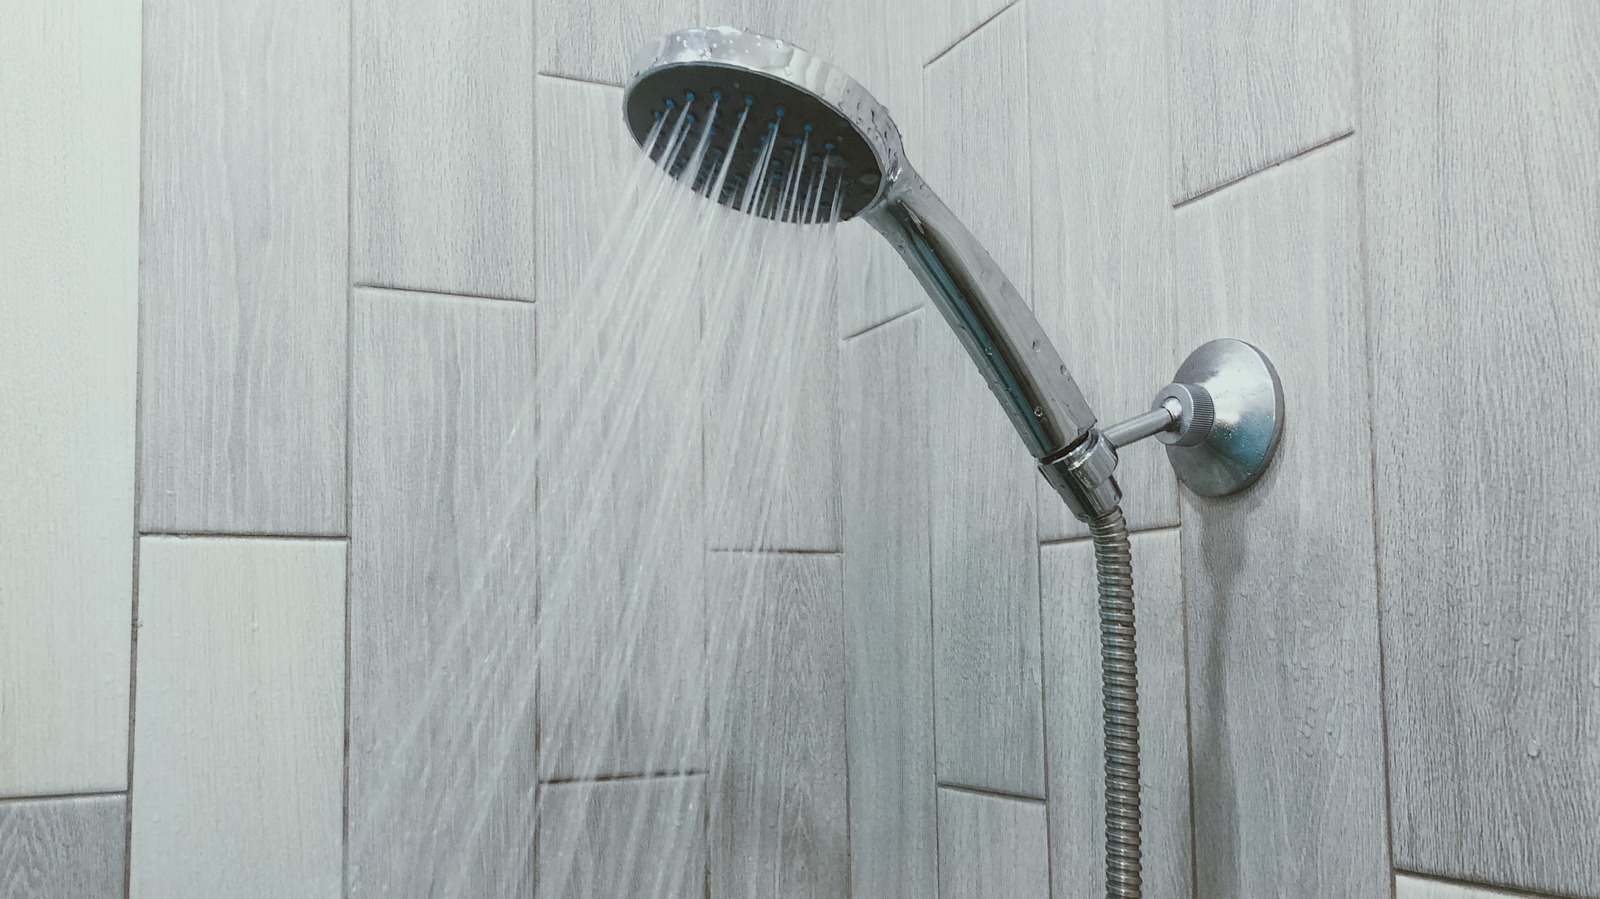 https://www.housedigest.com/img/gallery/the-best-shower-cleaners-for-every-bathroom/l-intro-1675958592.jpg